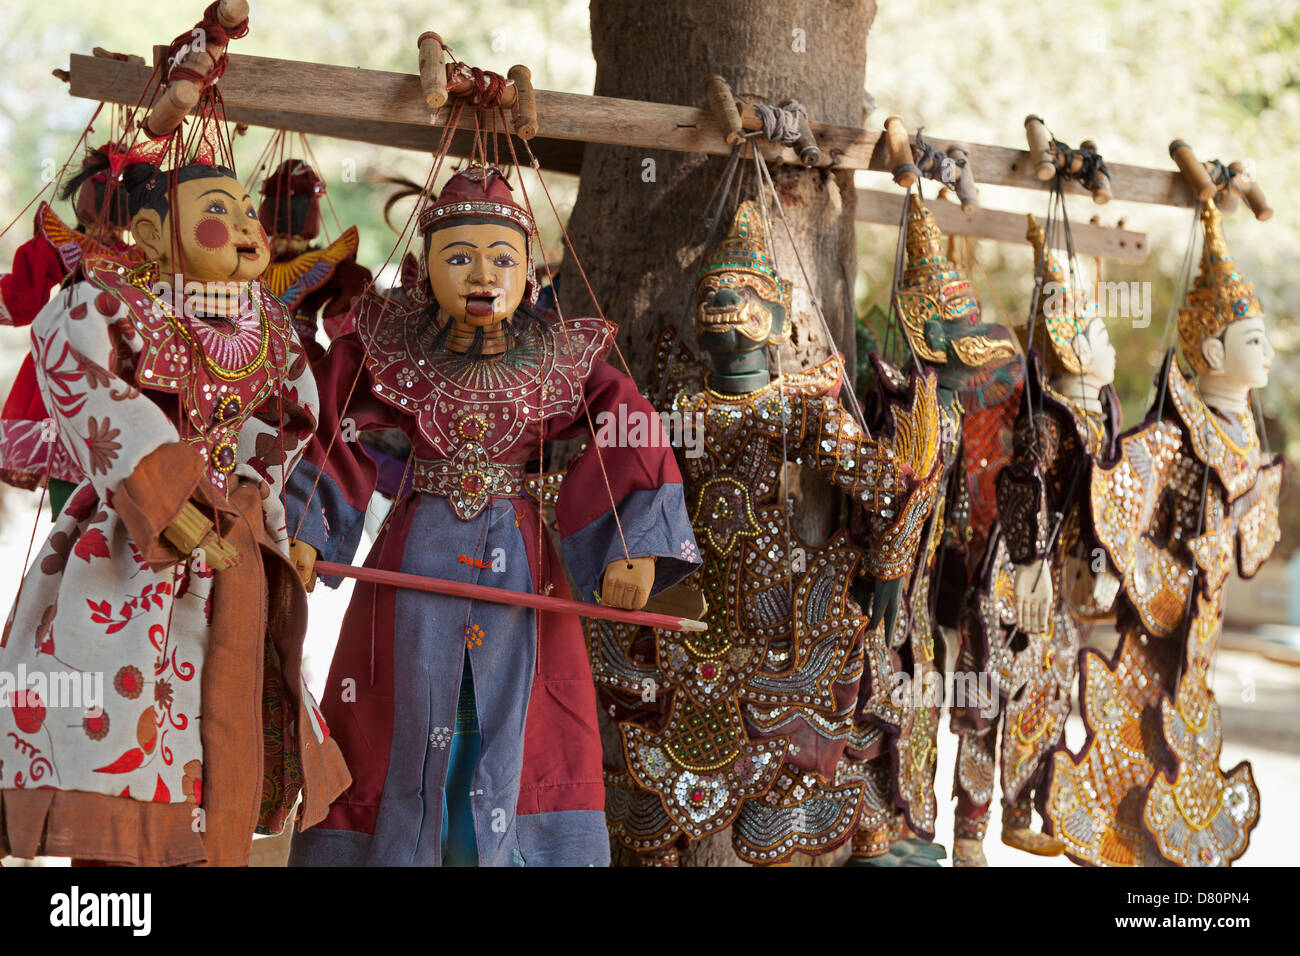 Puppets hanging from a tree in Mingun, Myanmar Stock Photo